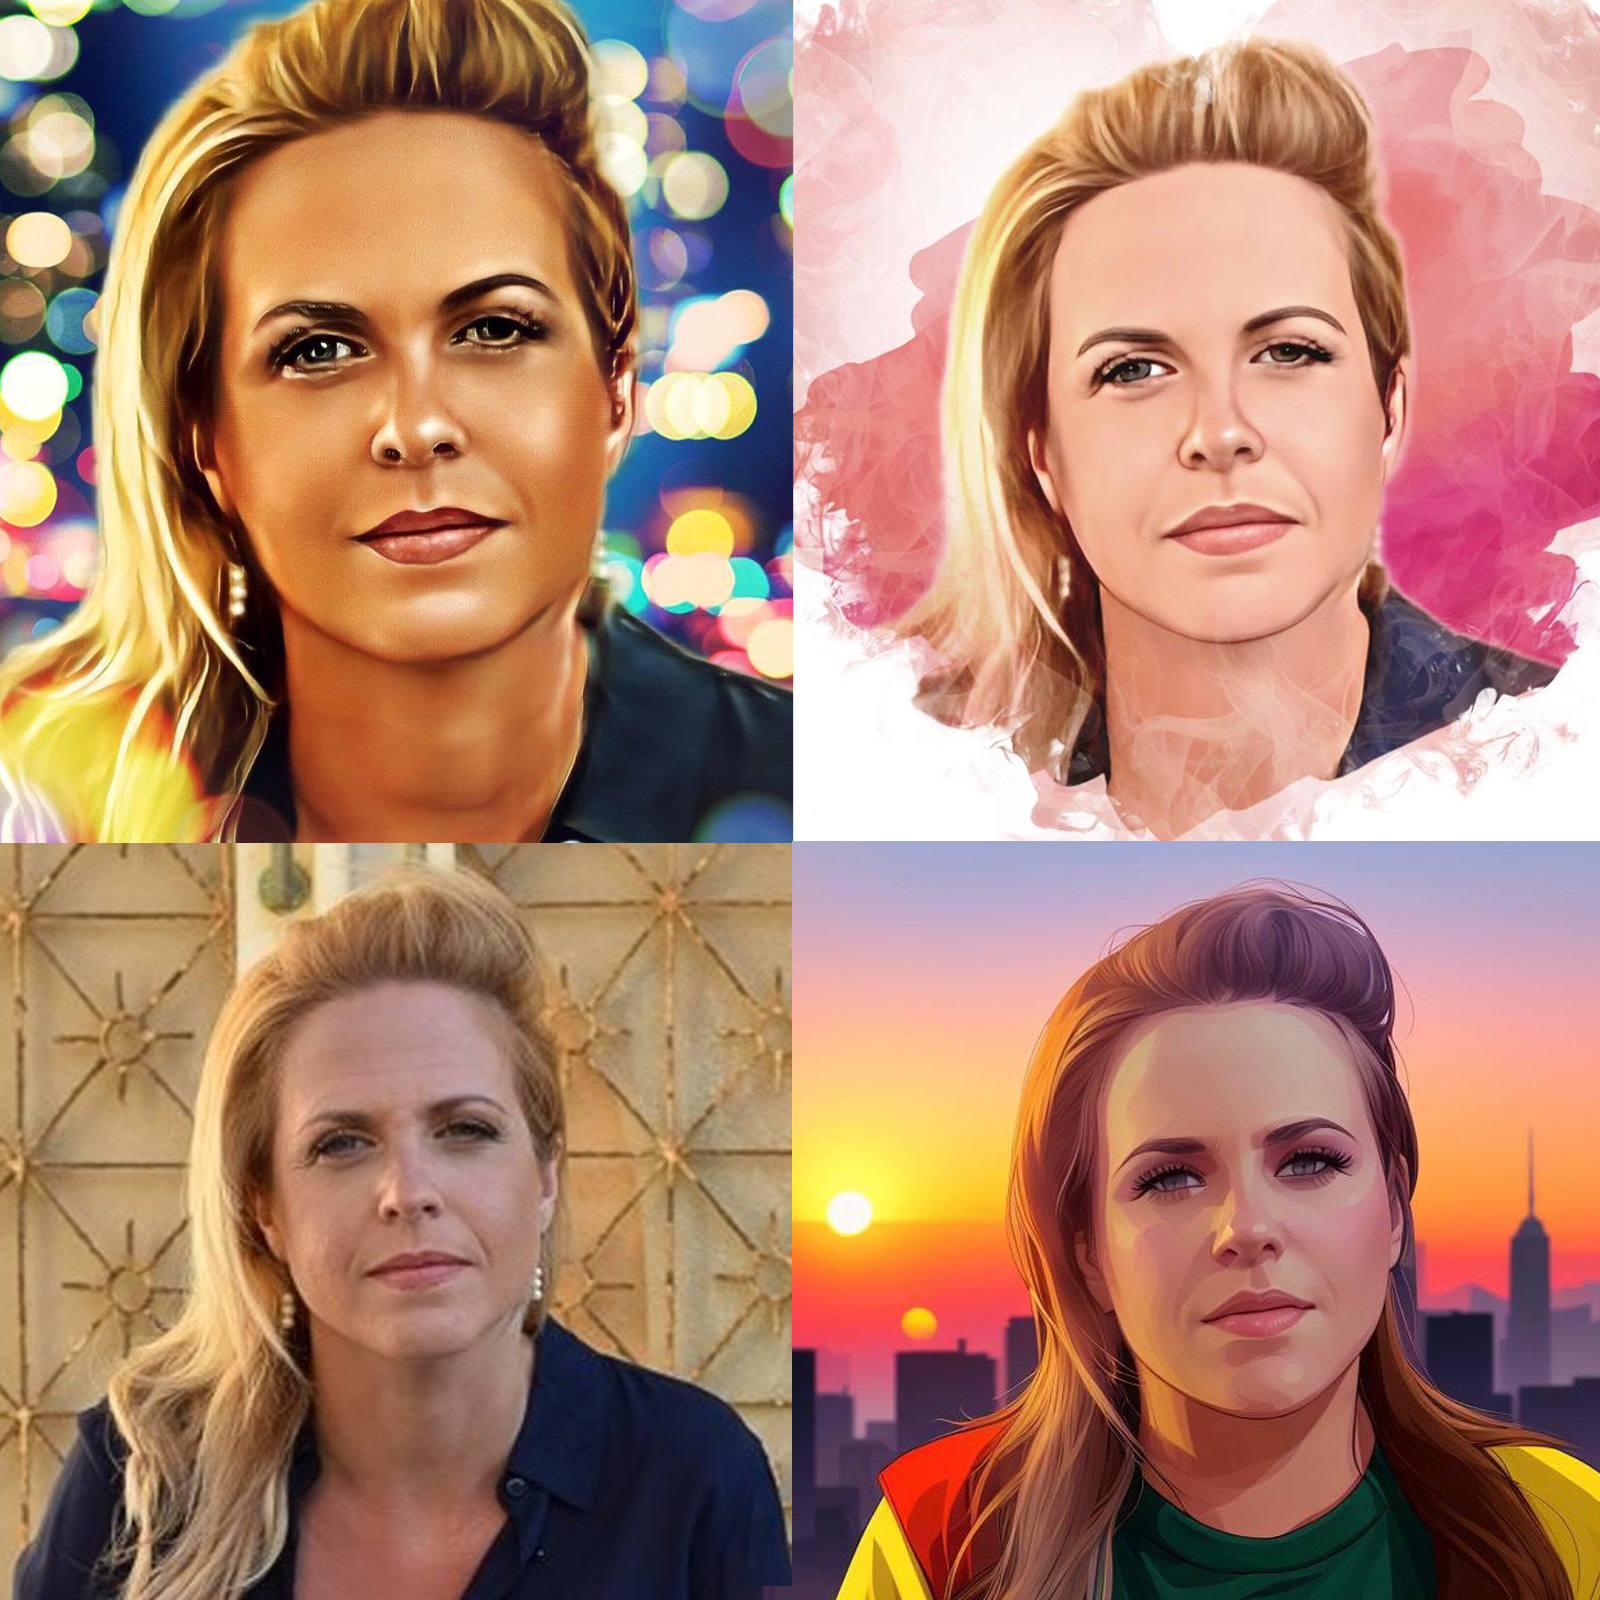 portrait art examples from an AI photo booth